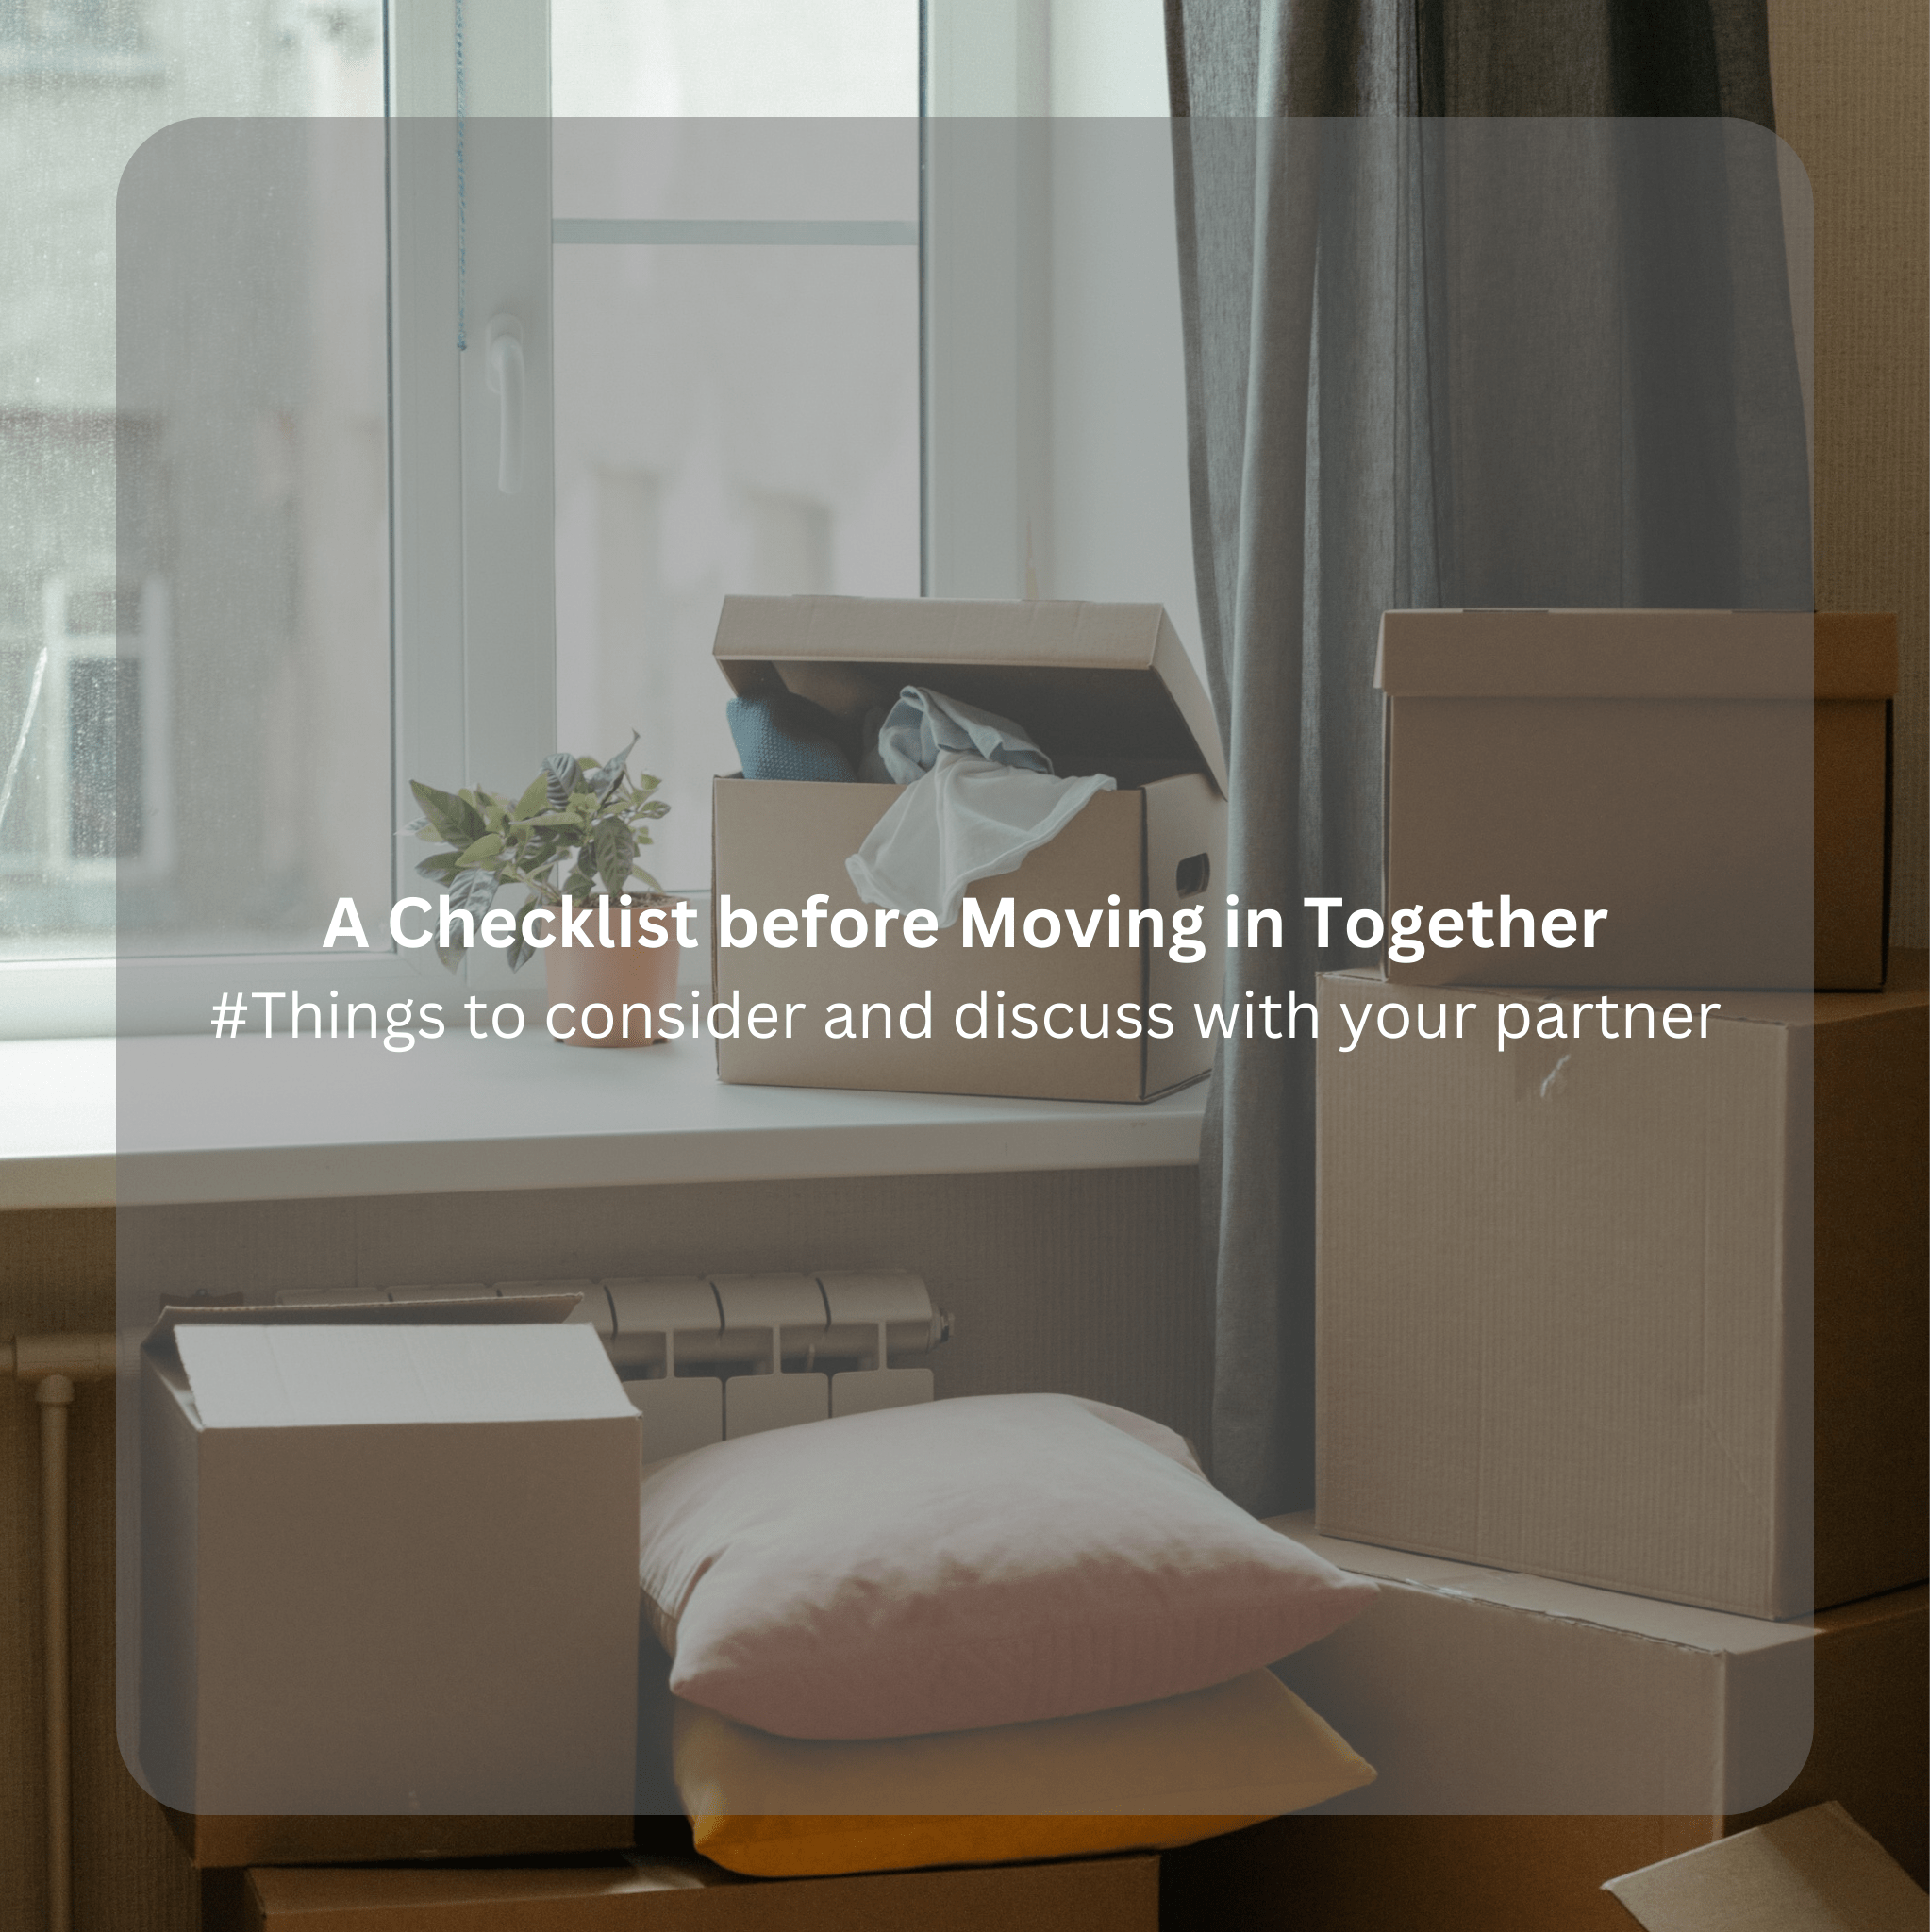 A Checklist before Moving in Together